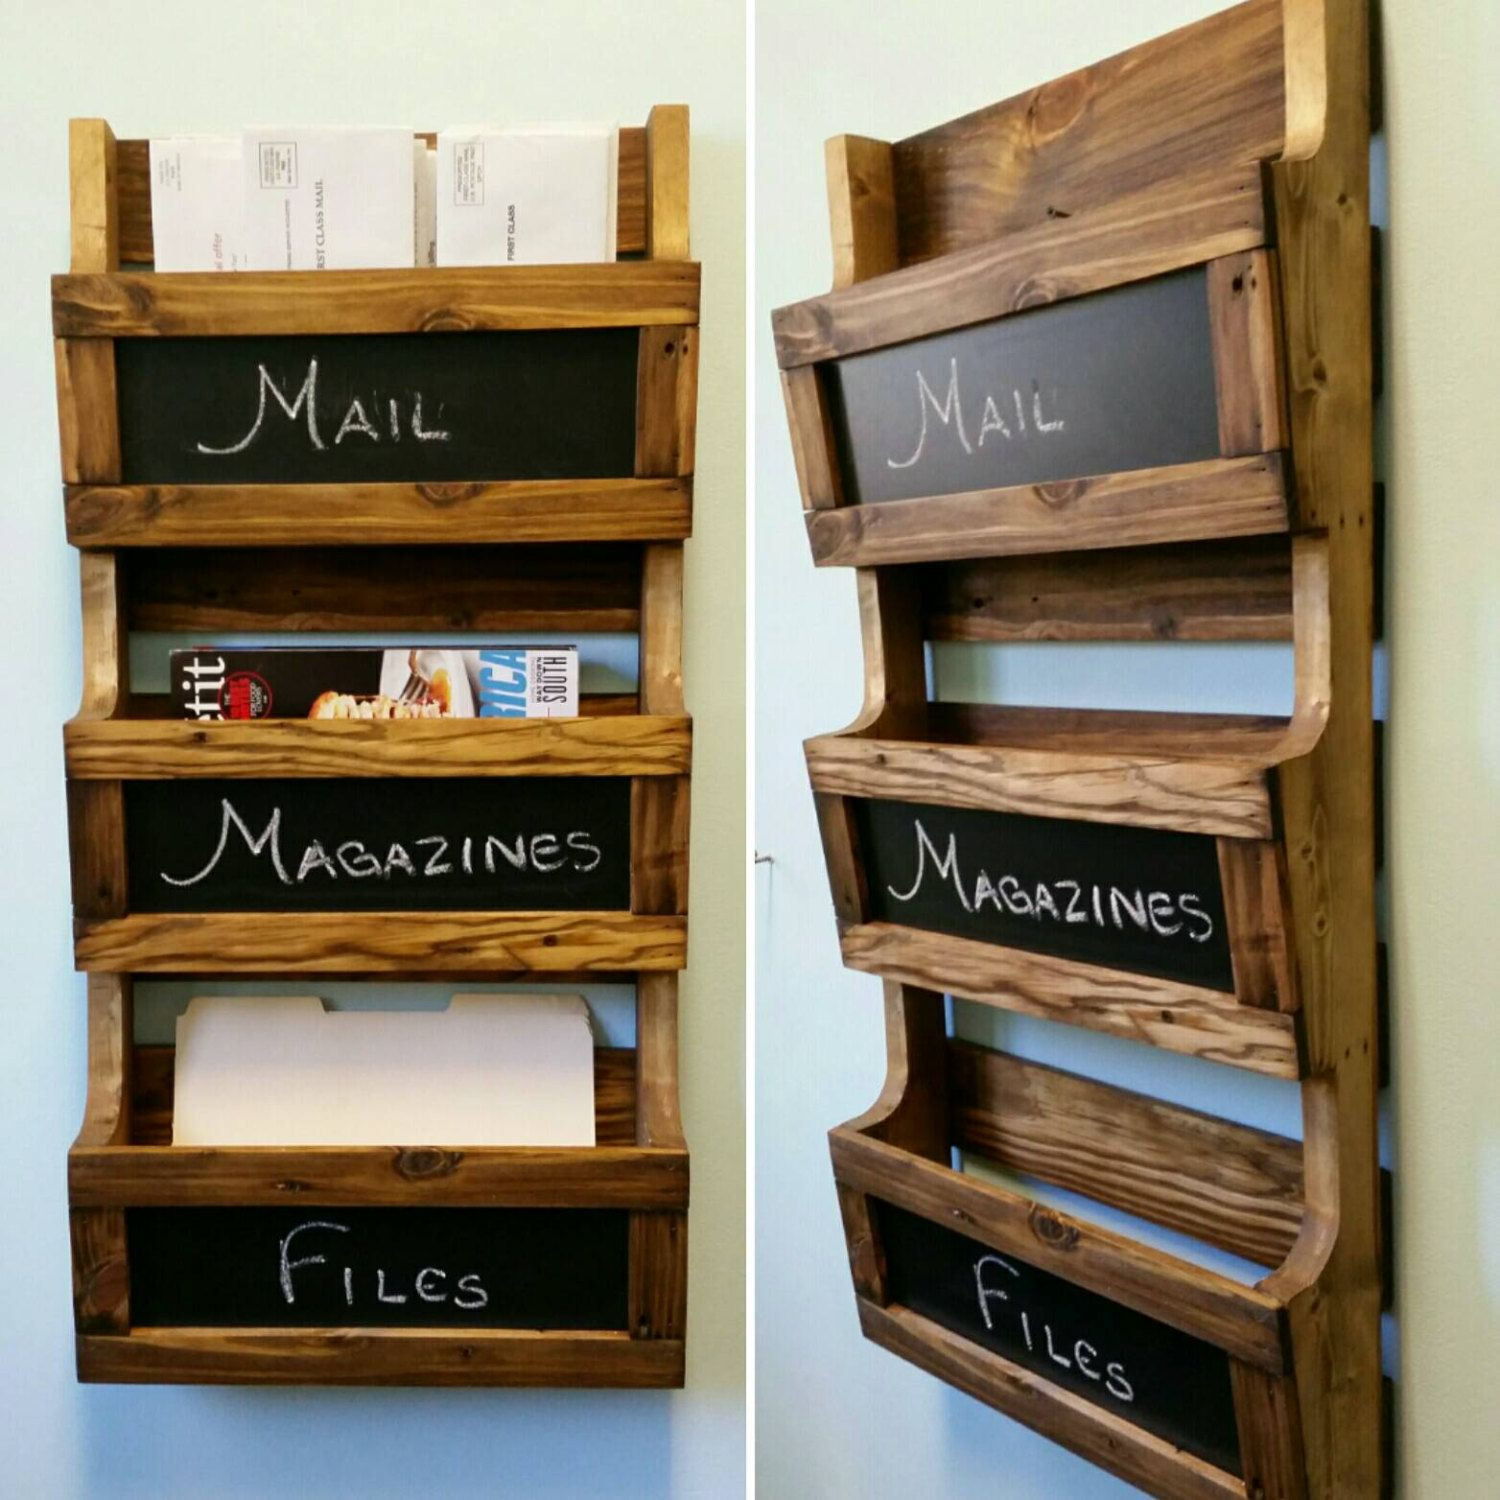 DIY Wall Pocket Organizer
 Accessories Ikea Book Boxes And Wall File Organizer Also